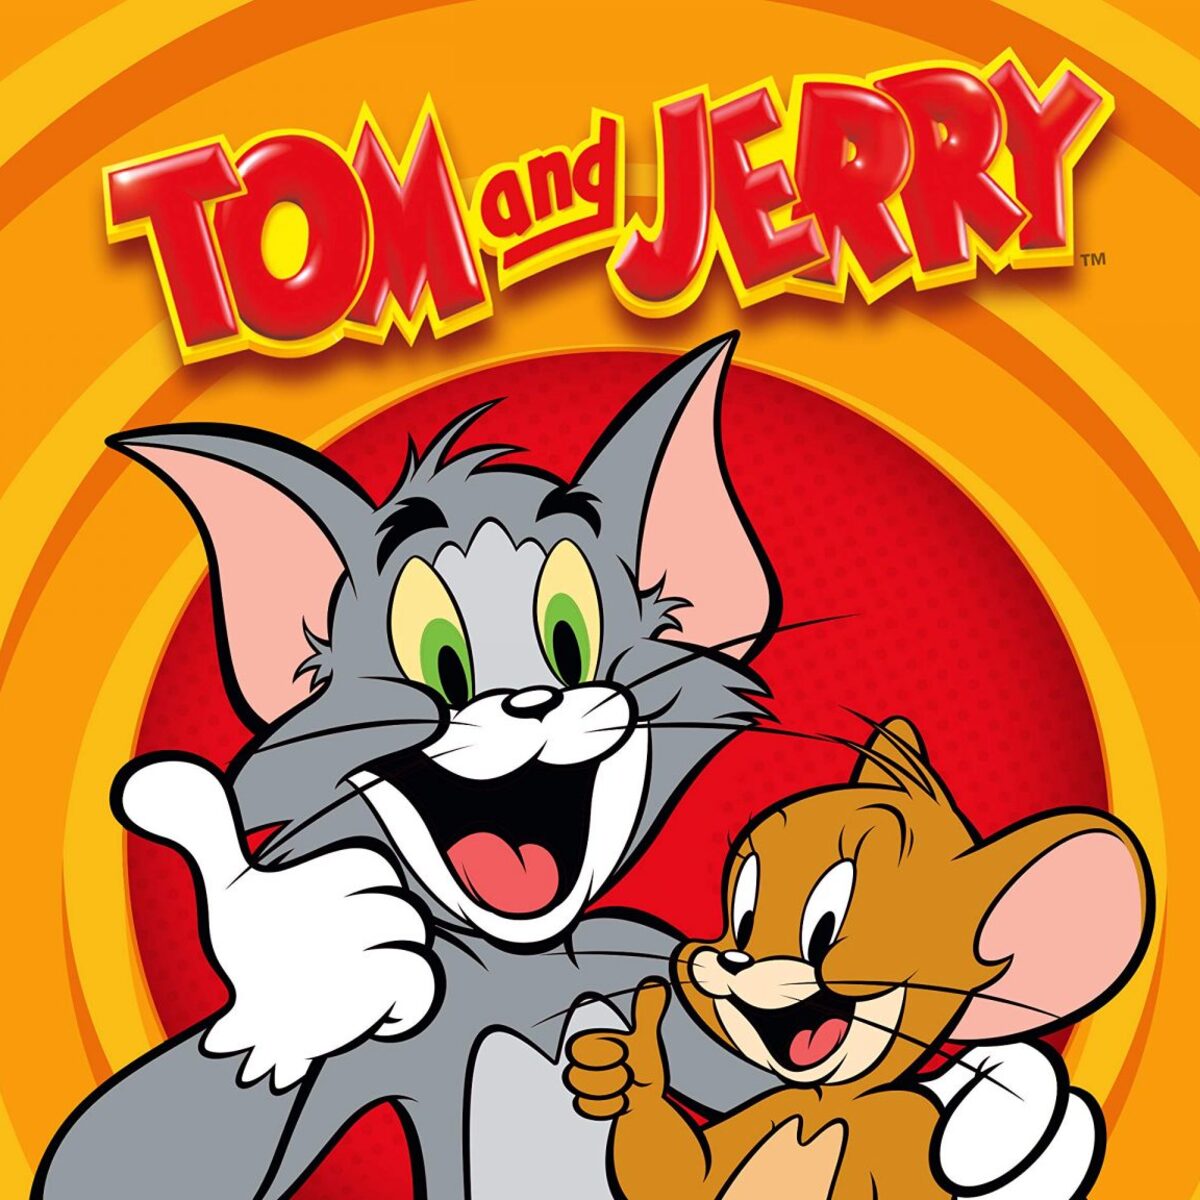 Tom and Jerry Image classification | Kaggle